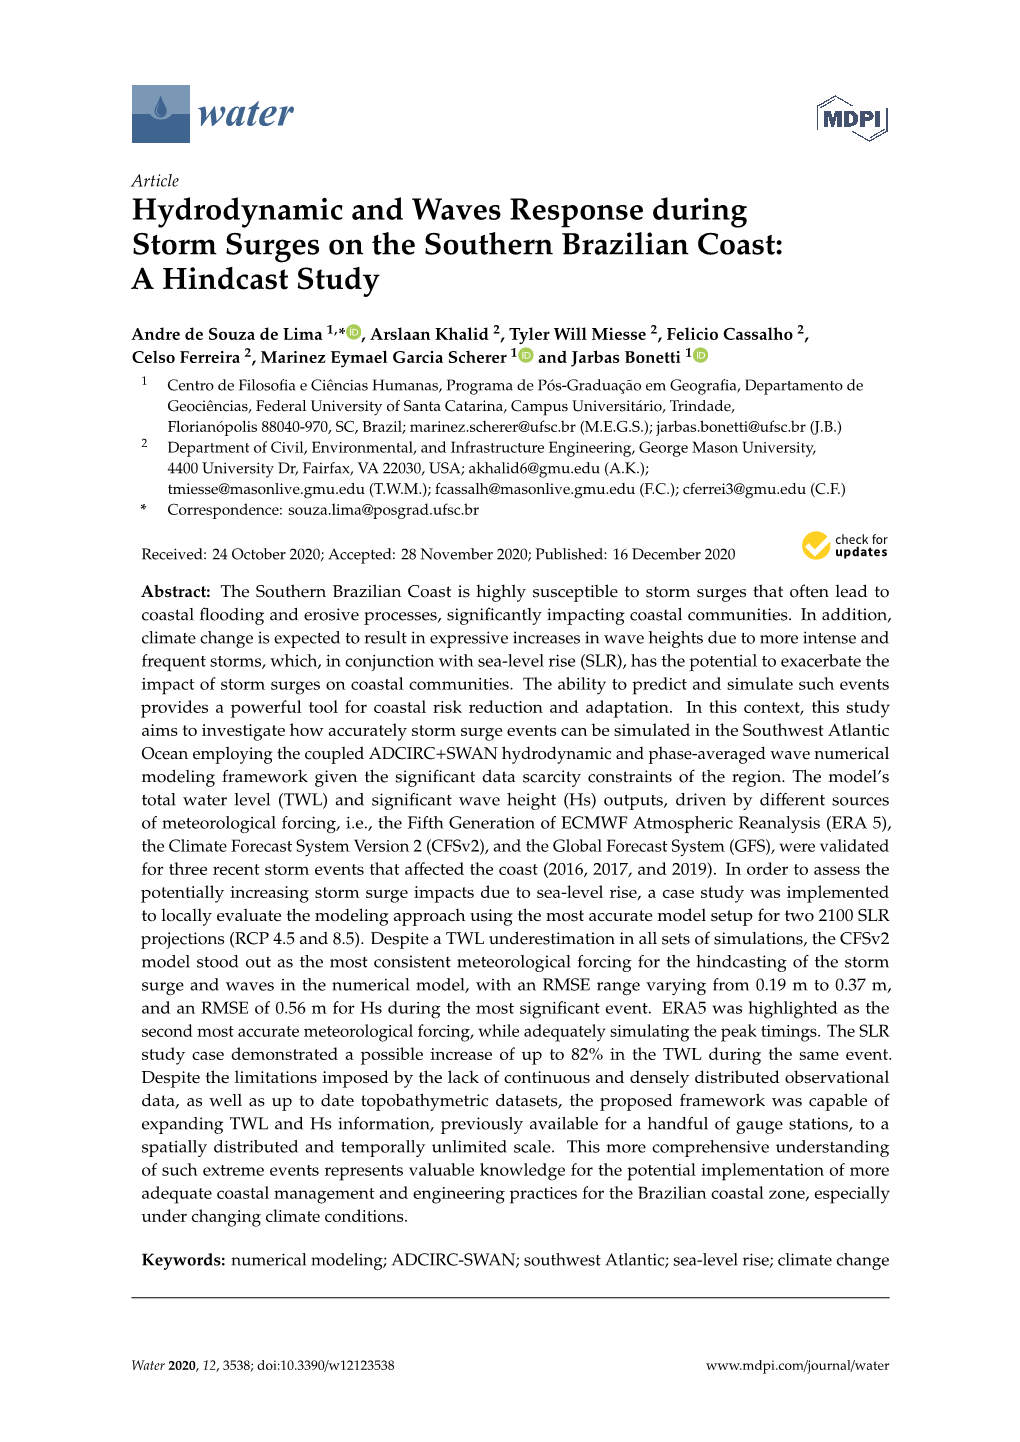 Hydrodynamic and Waves Response During Storm Surges on the Southern Brazilian Coast: a Hindcast Study